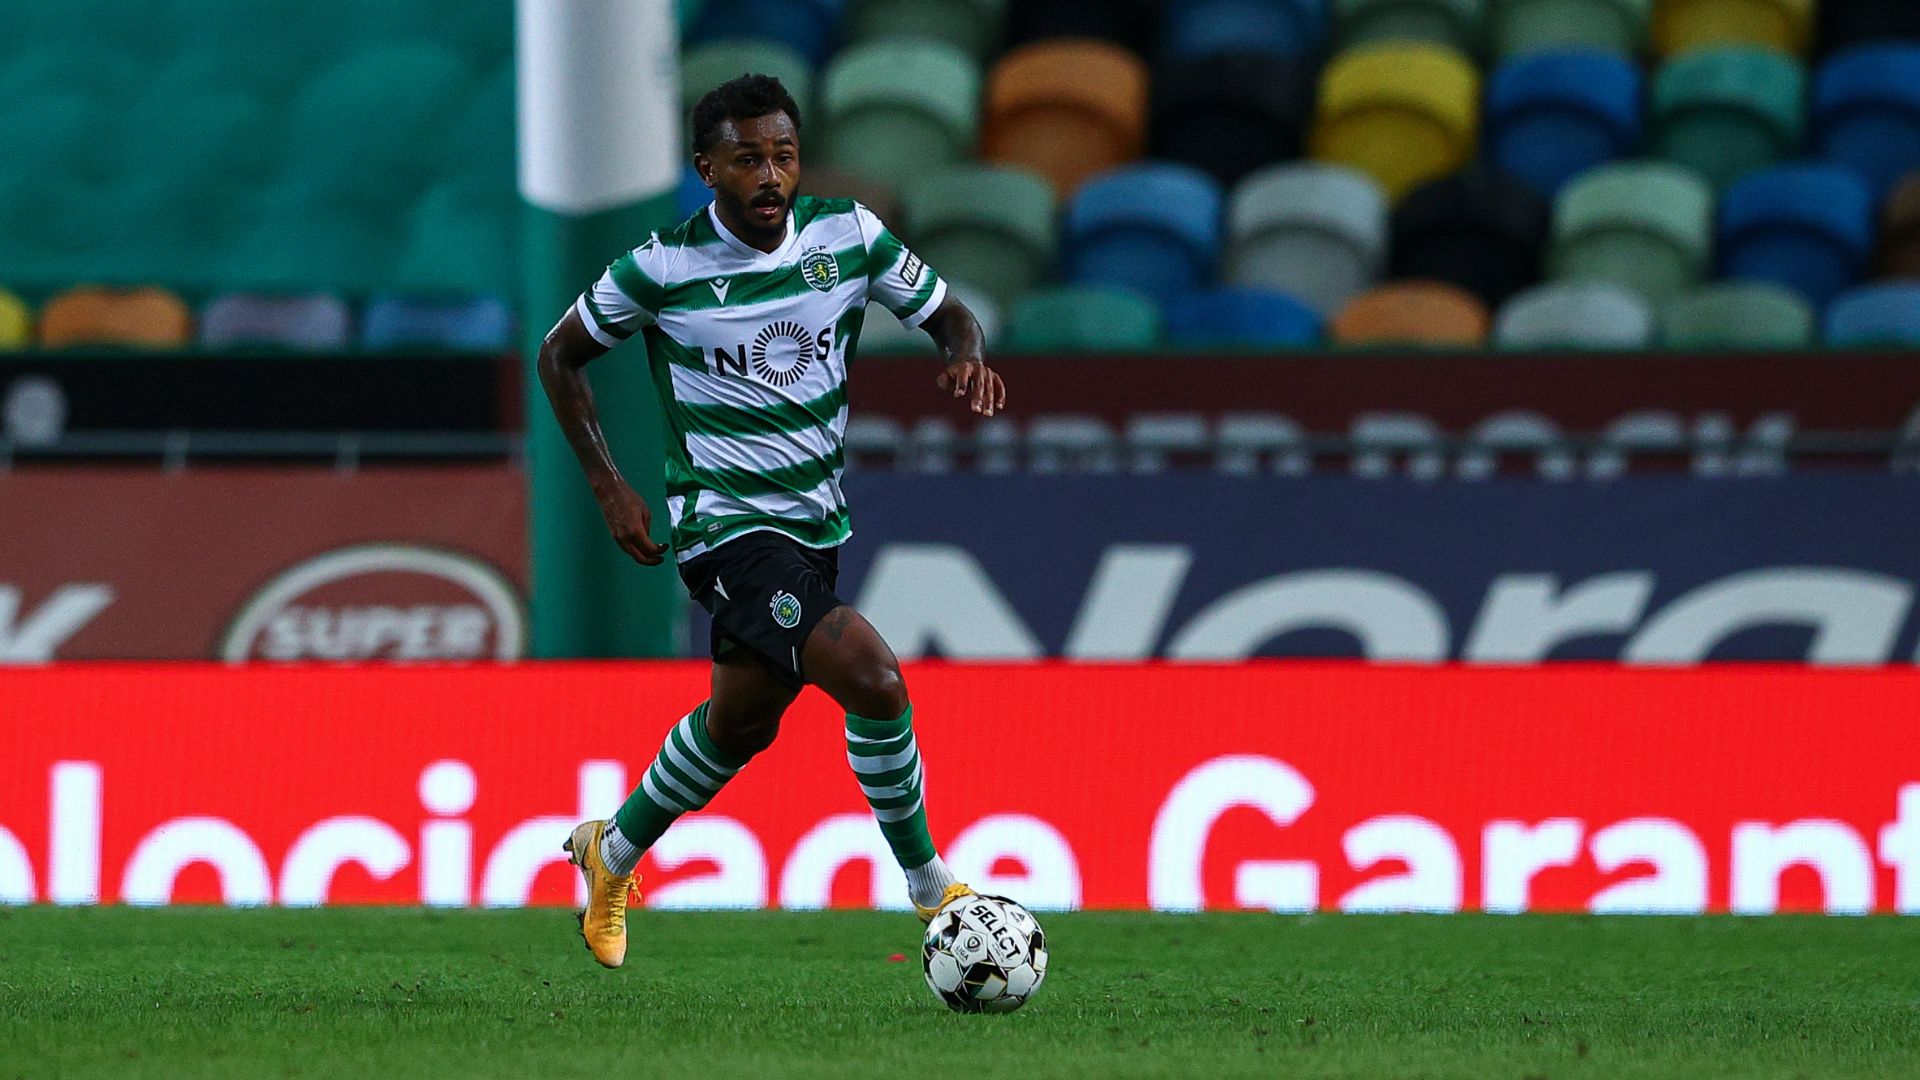 Wendel in action for Sporting, a club he left after leaving Fluminense (Credit: Getty Images)